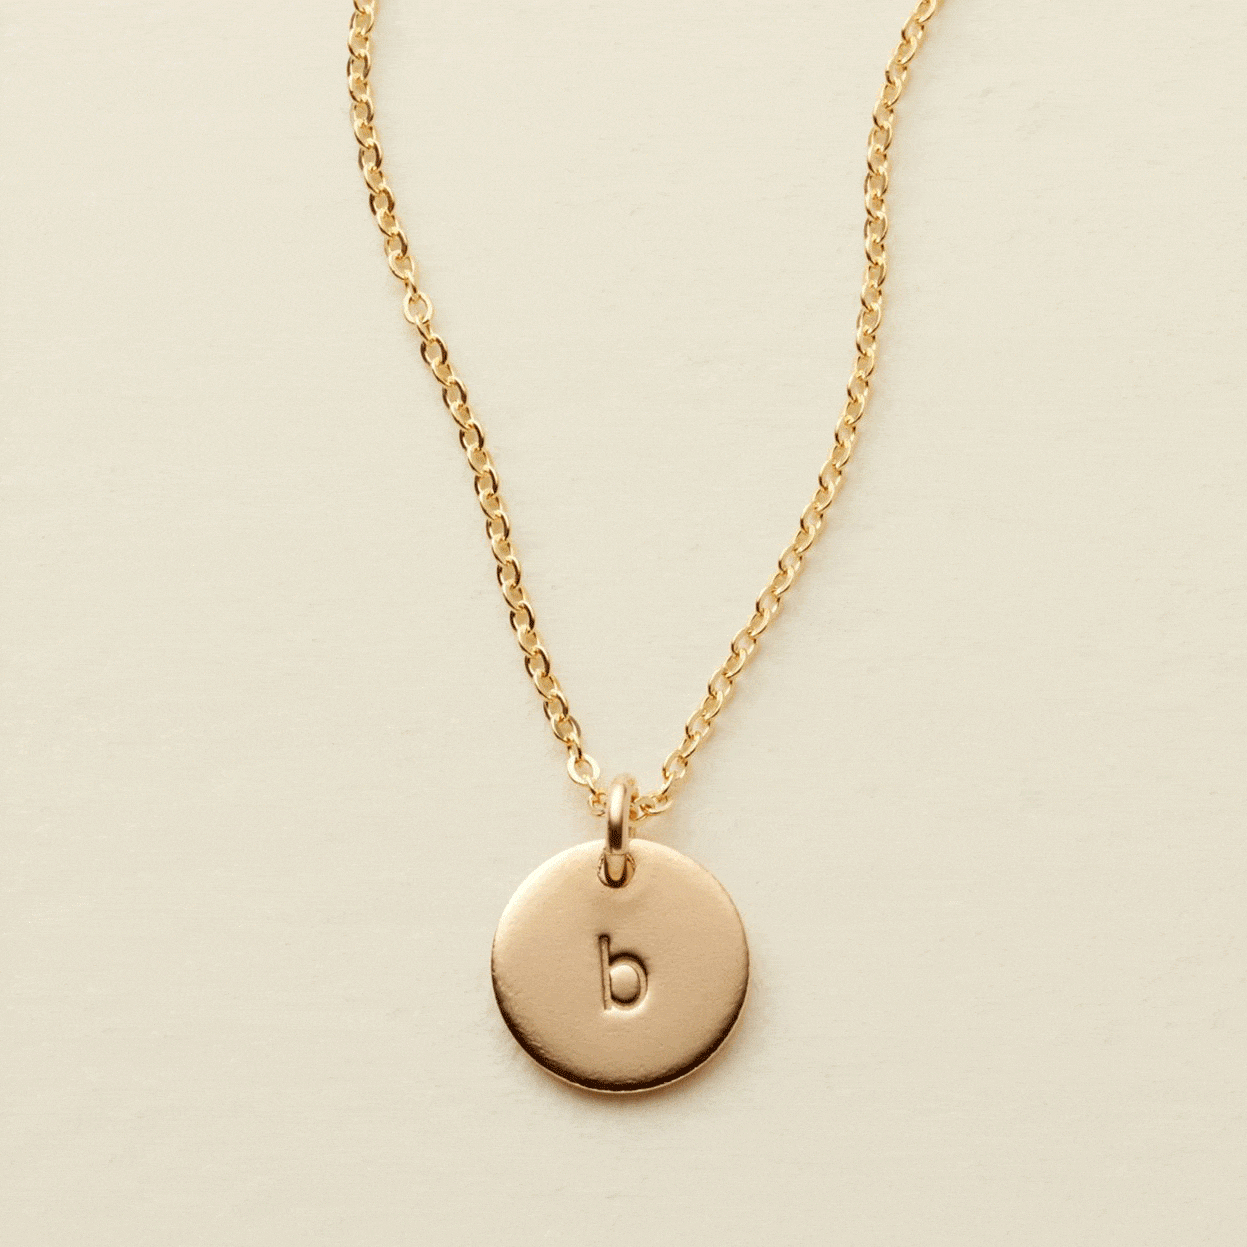 Initial Disc Necklace - 3/8" Necklace